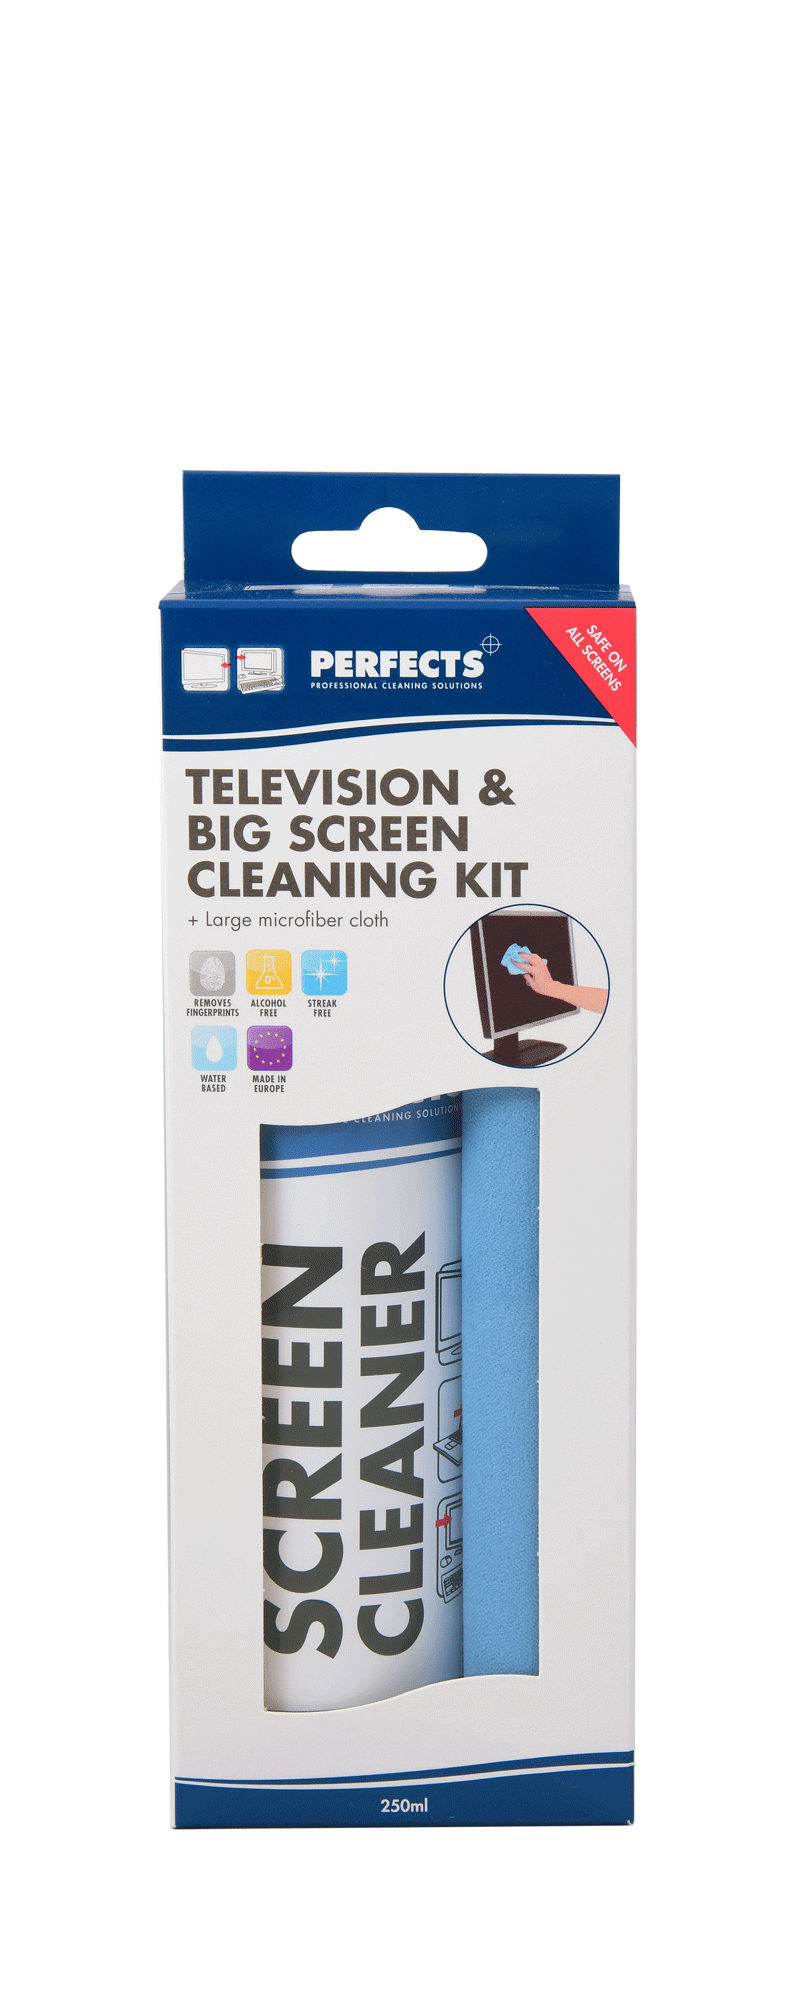 Television & Big Screen Cleaning Kit